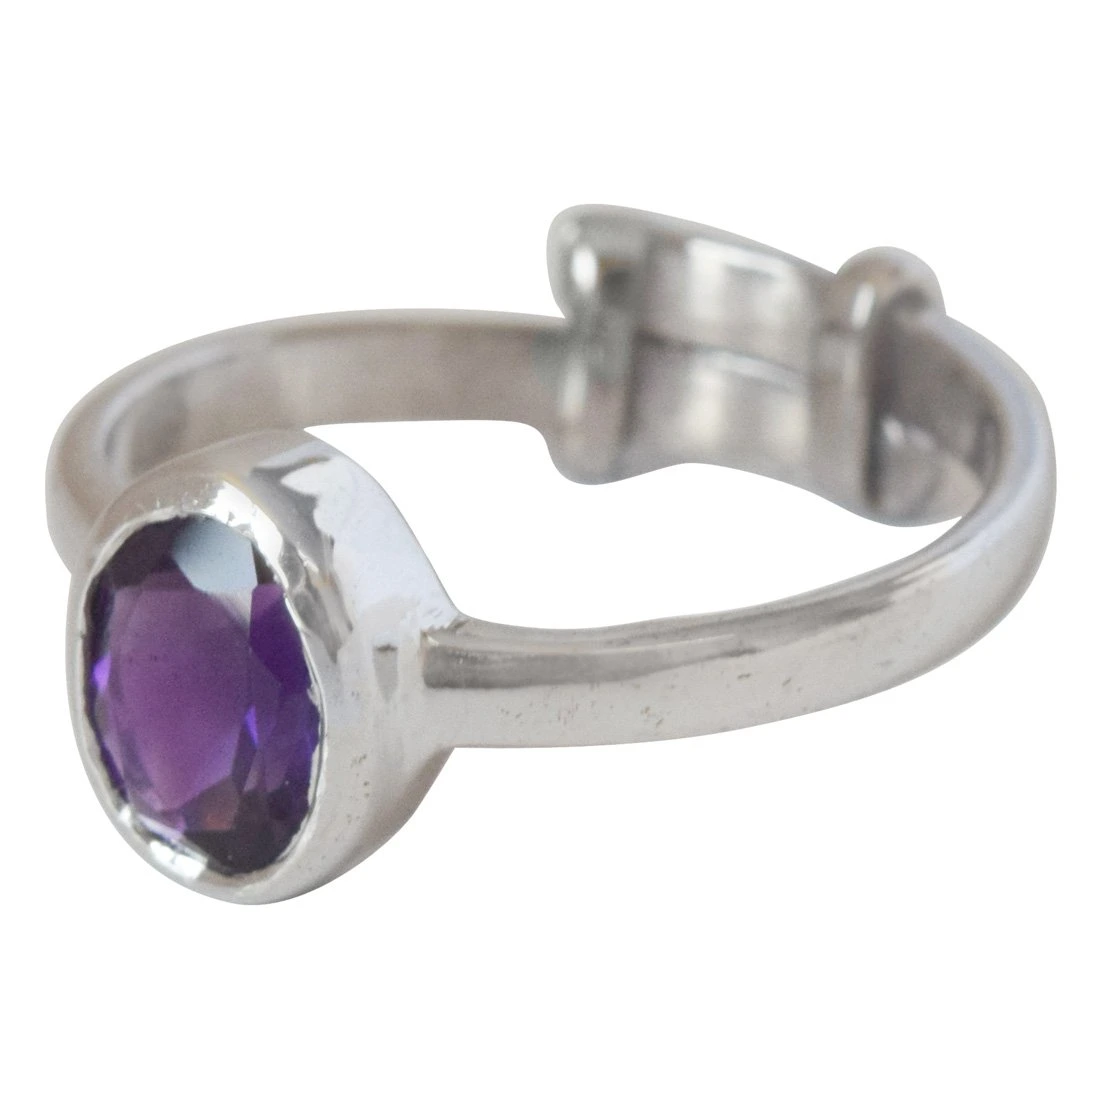 1.07cts Oval Faceted Purple Amethyst and 925 Silver Astrological Ring (GSR62)